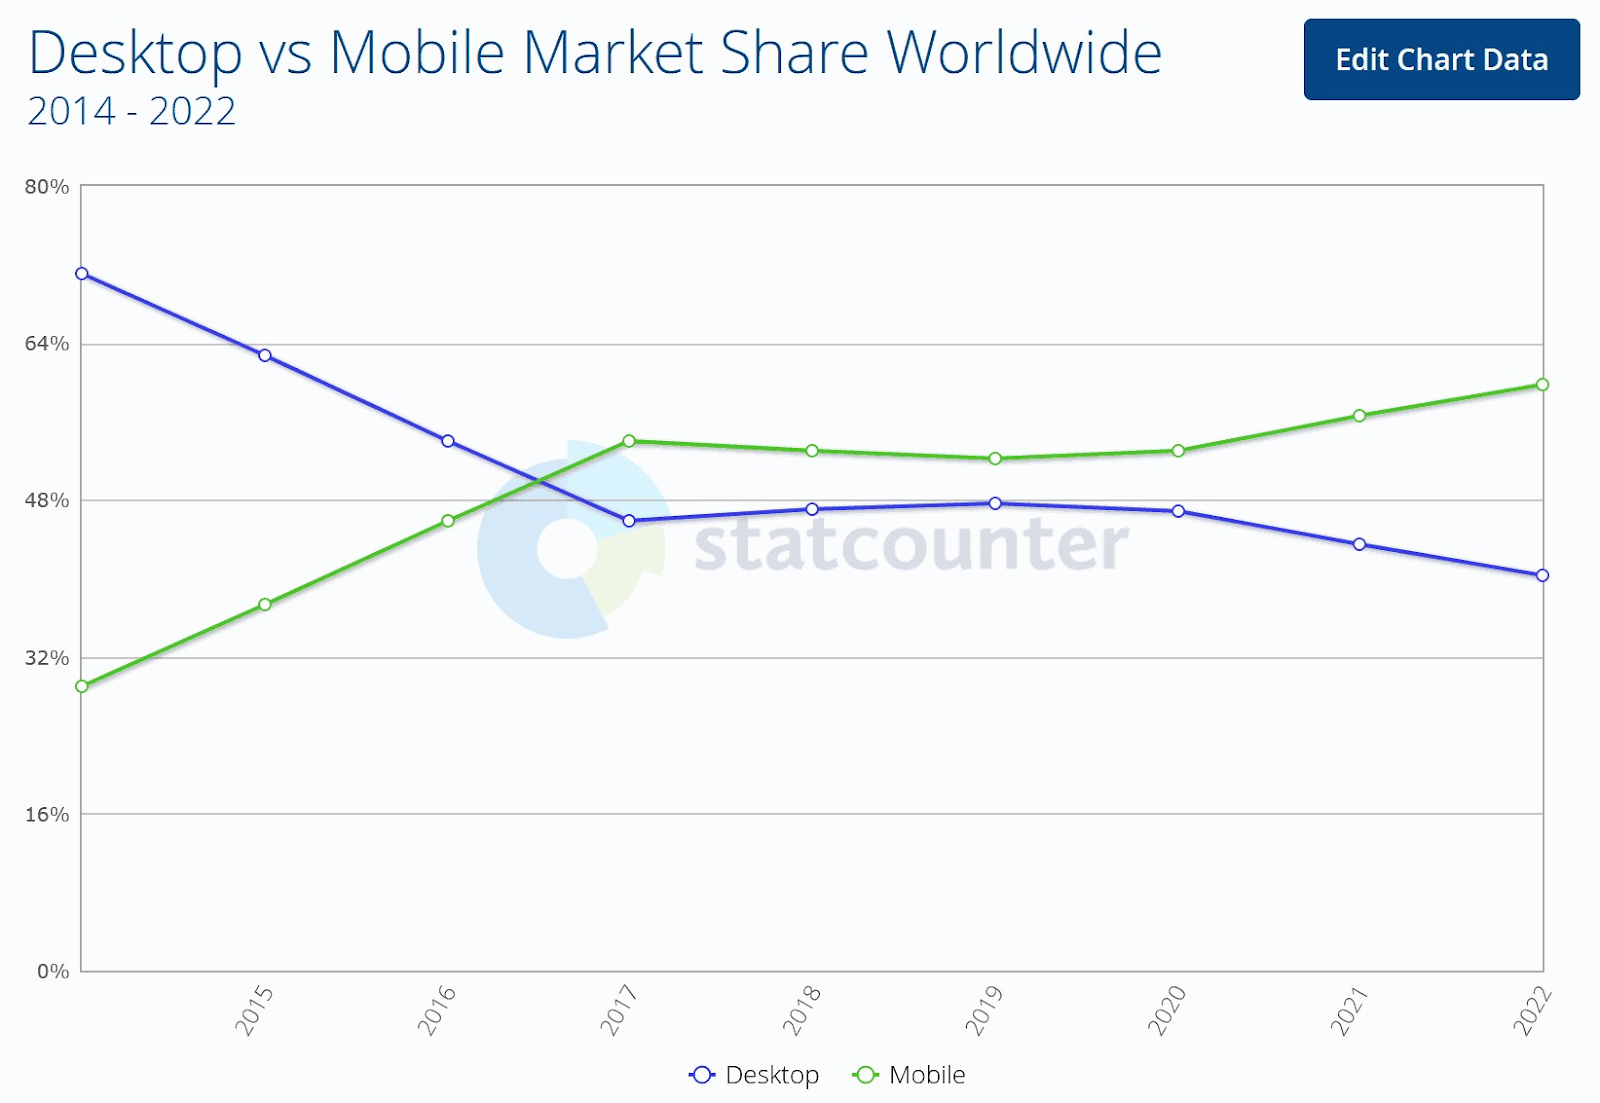 A graph showing "desktop vs mobile market share worldwide" from 2014 to 2022